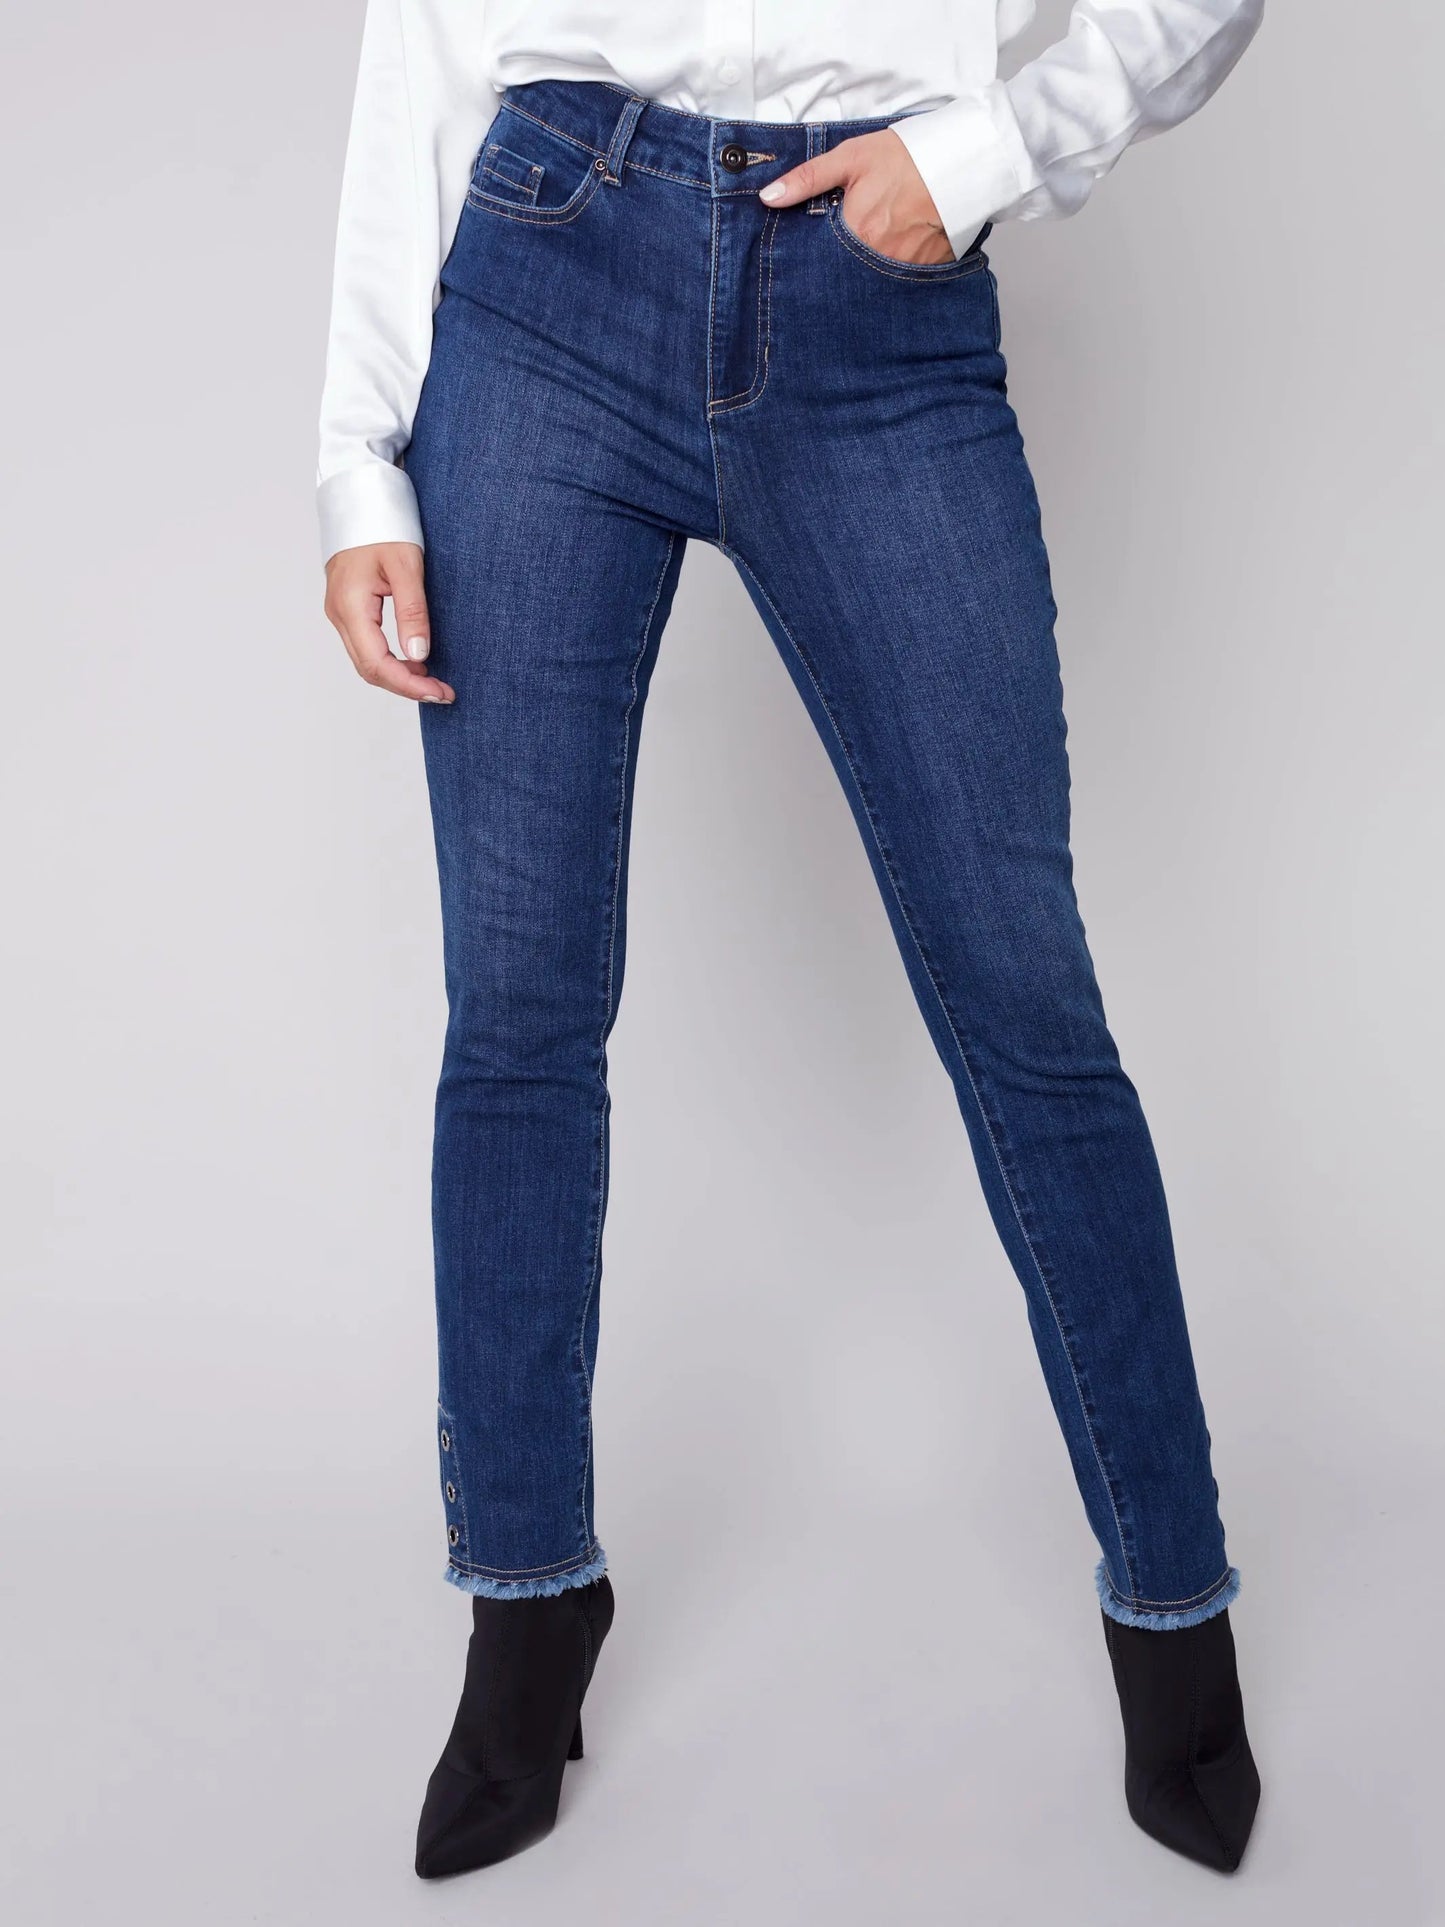 The model is wearing Charlie B white frayed bottom eyelet jeans.